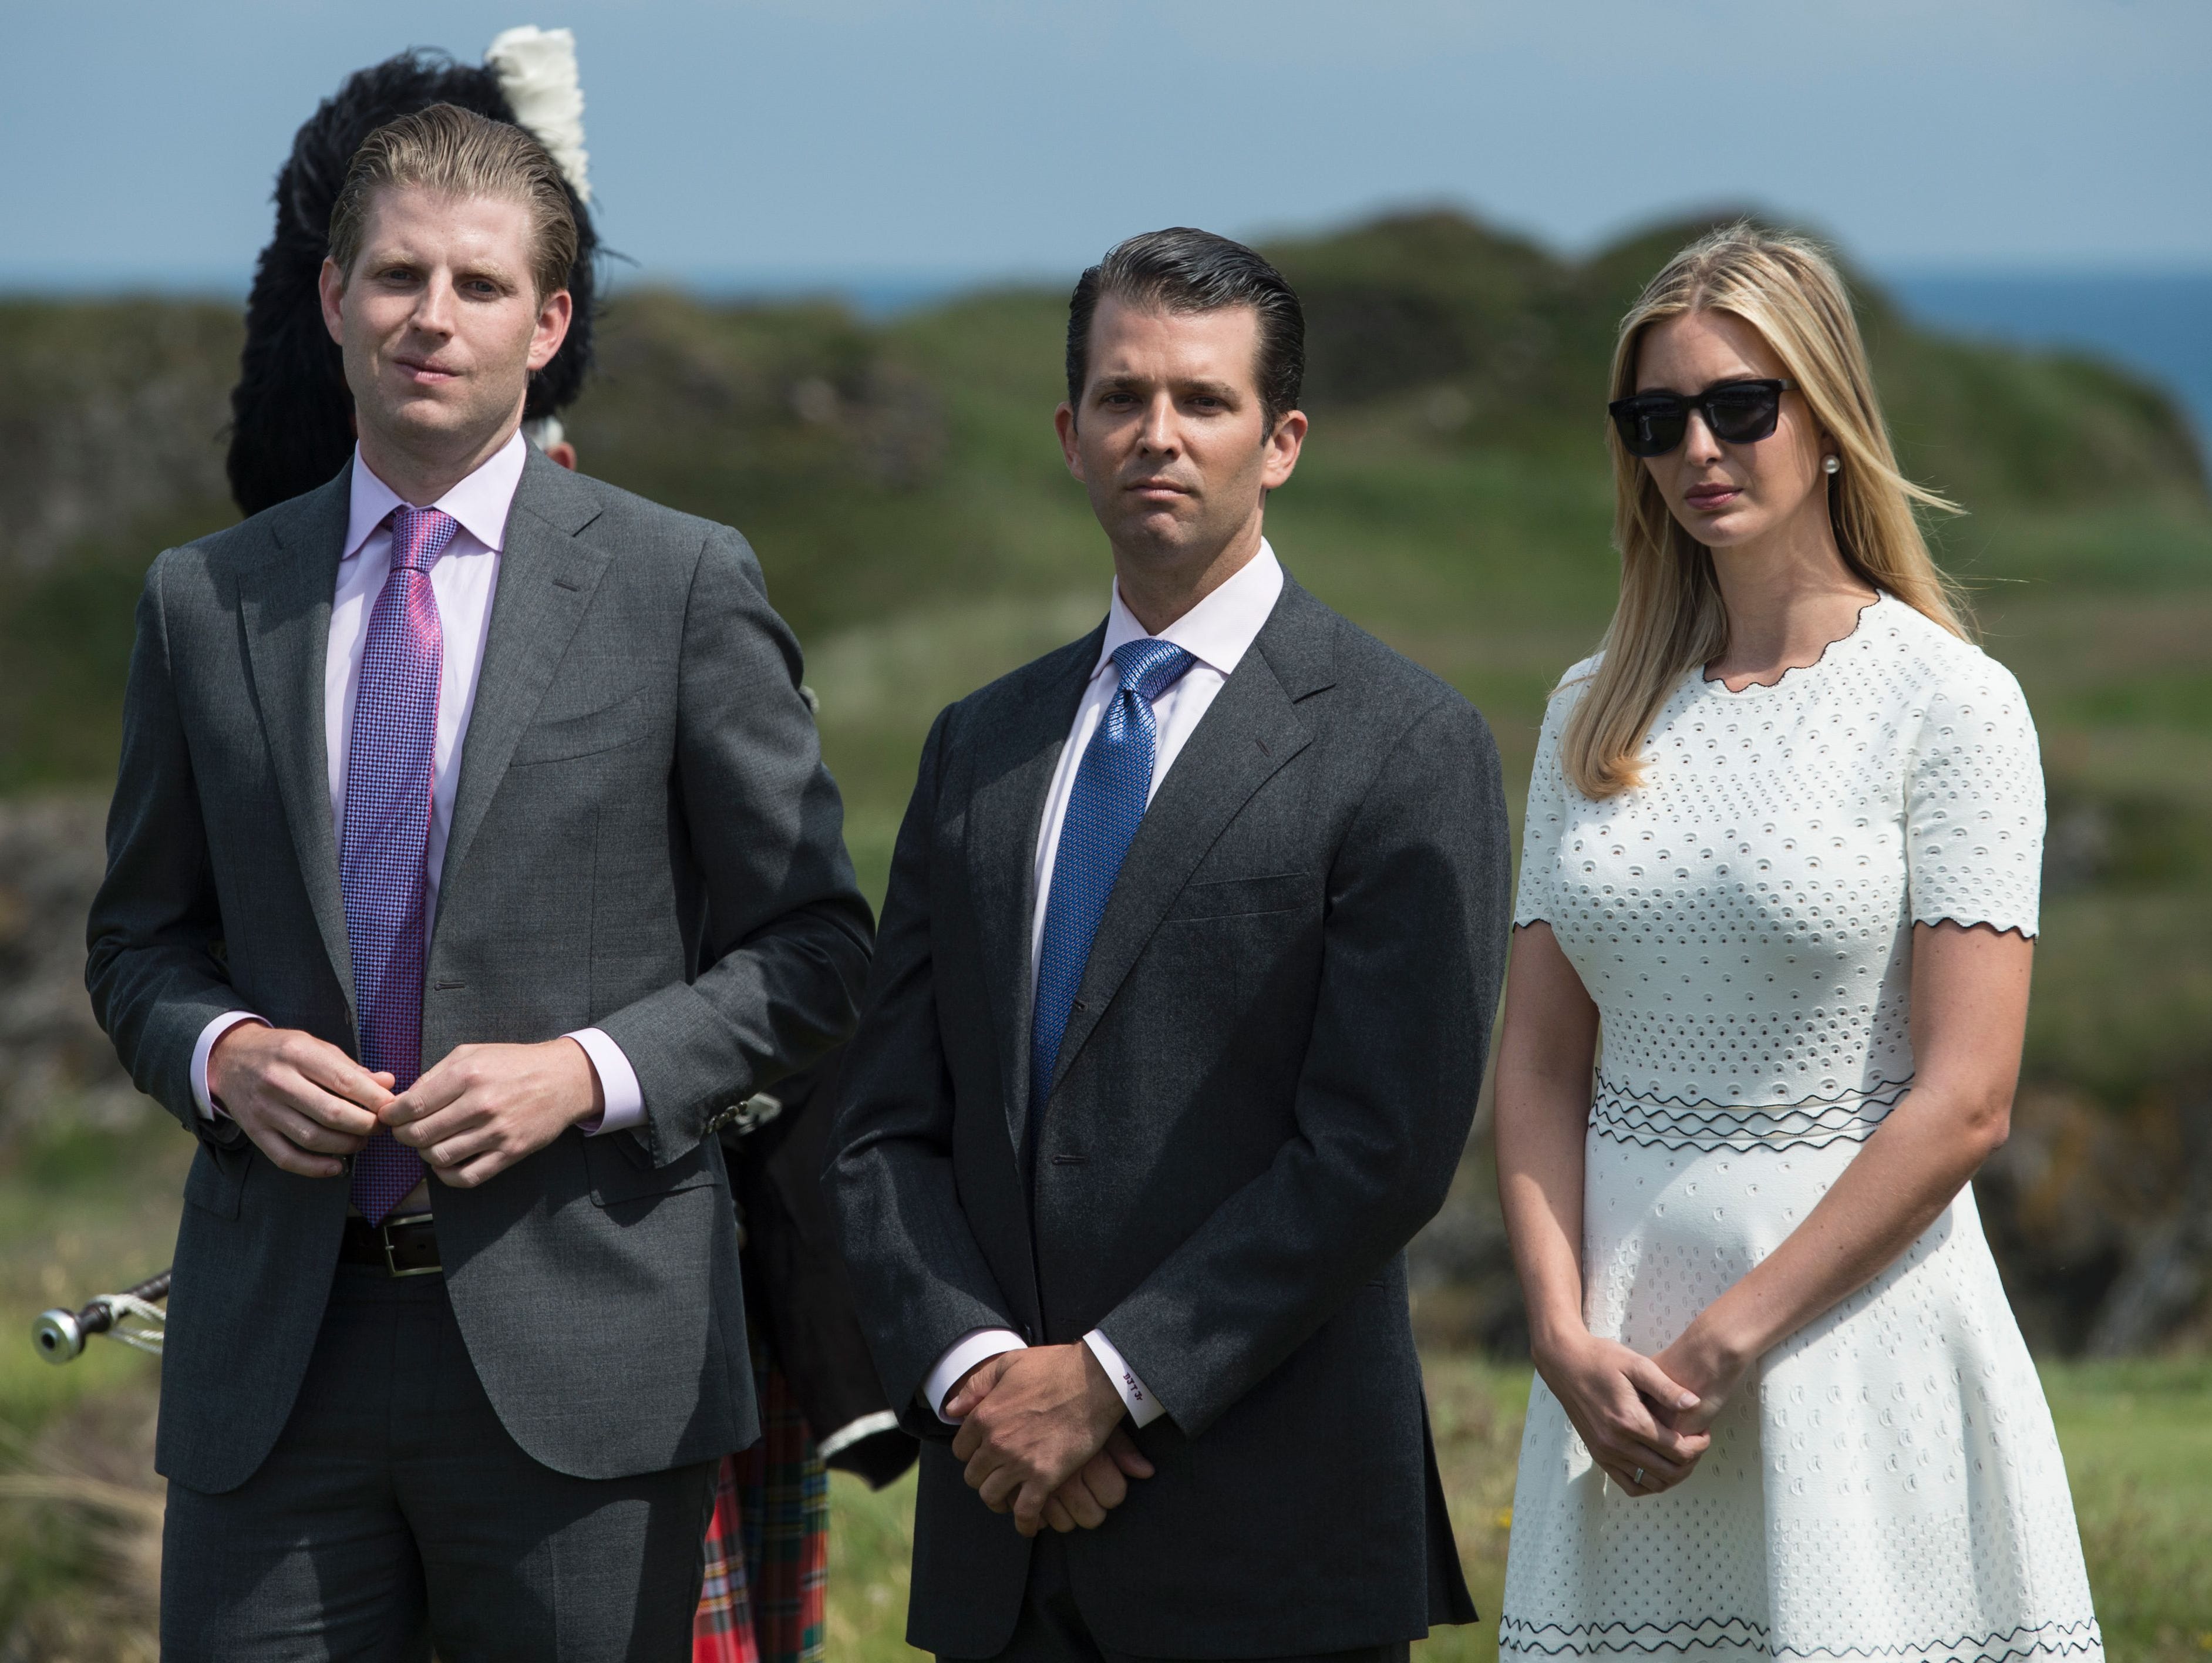 This file photo shows the children of Republican presidential-elect Donald Trump, Ivanka Trump (R), Donald Trump Jr. (C) and Eric Trump (L)  at the official opening of Trump Turnberry Hotel and Golf Resort in Turnberry, Scotland.